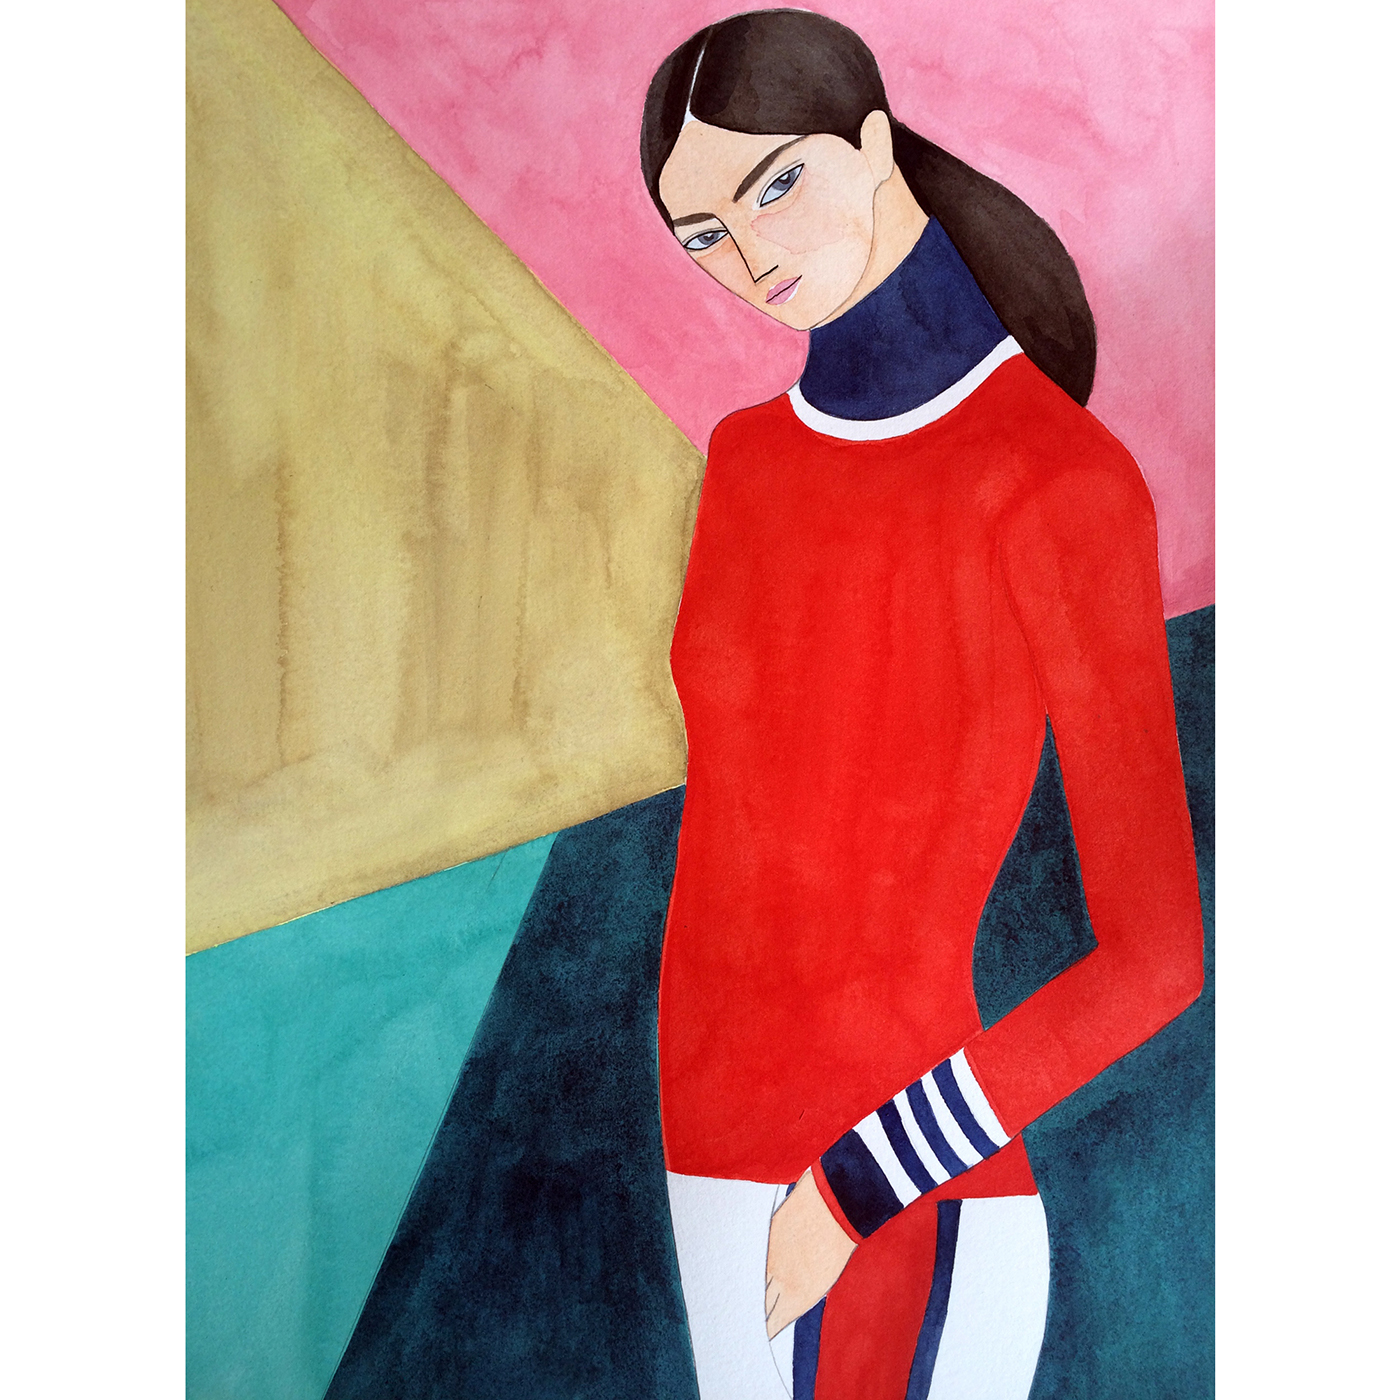 Tory Sport, commissioned paintings on Behance